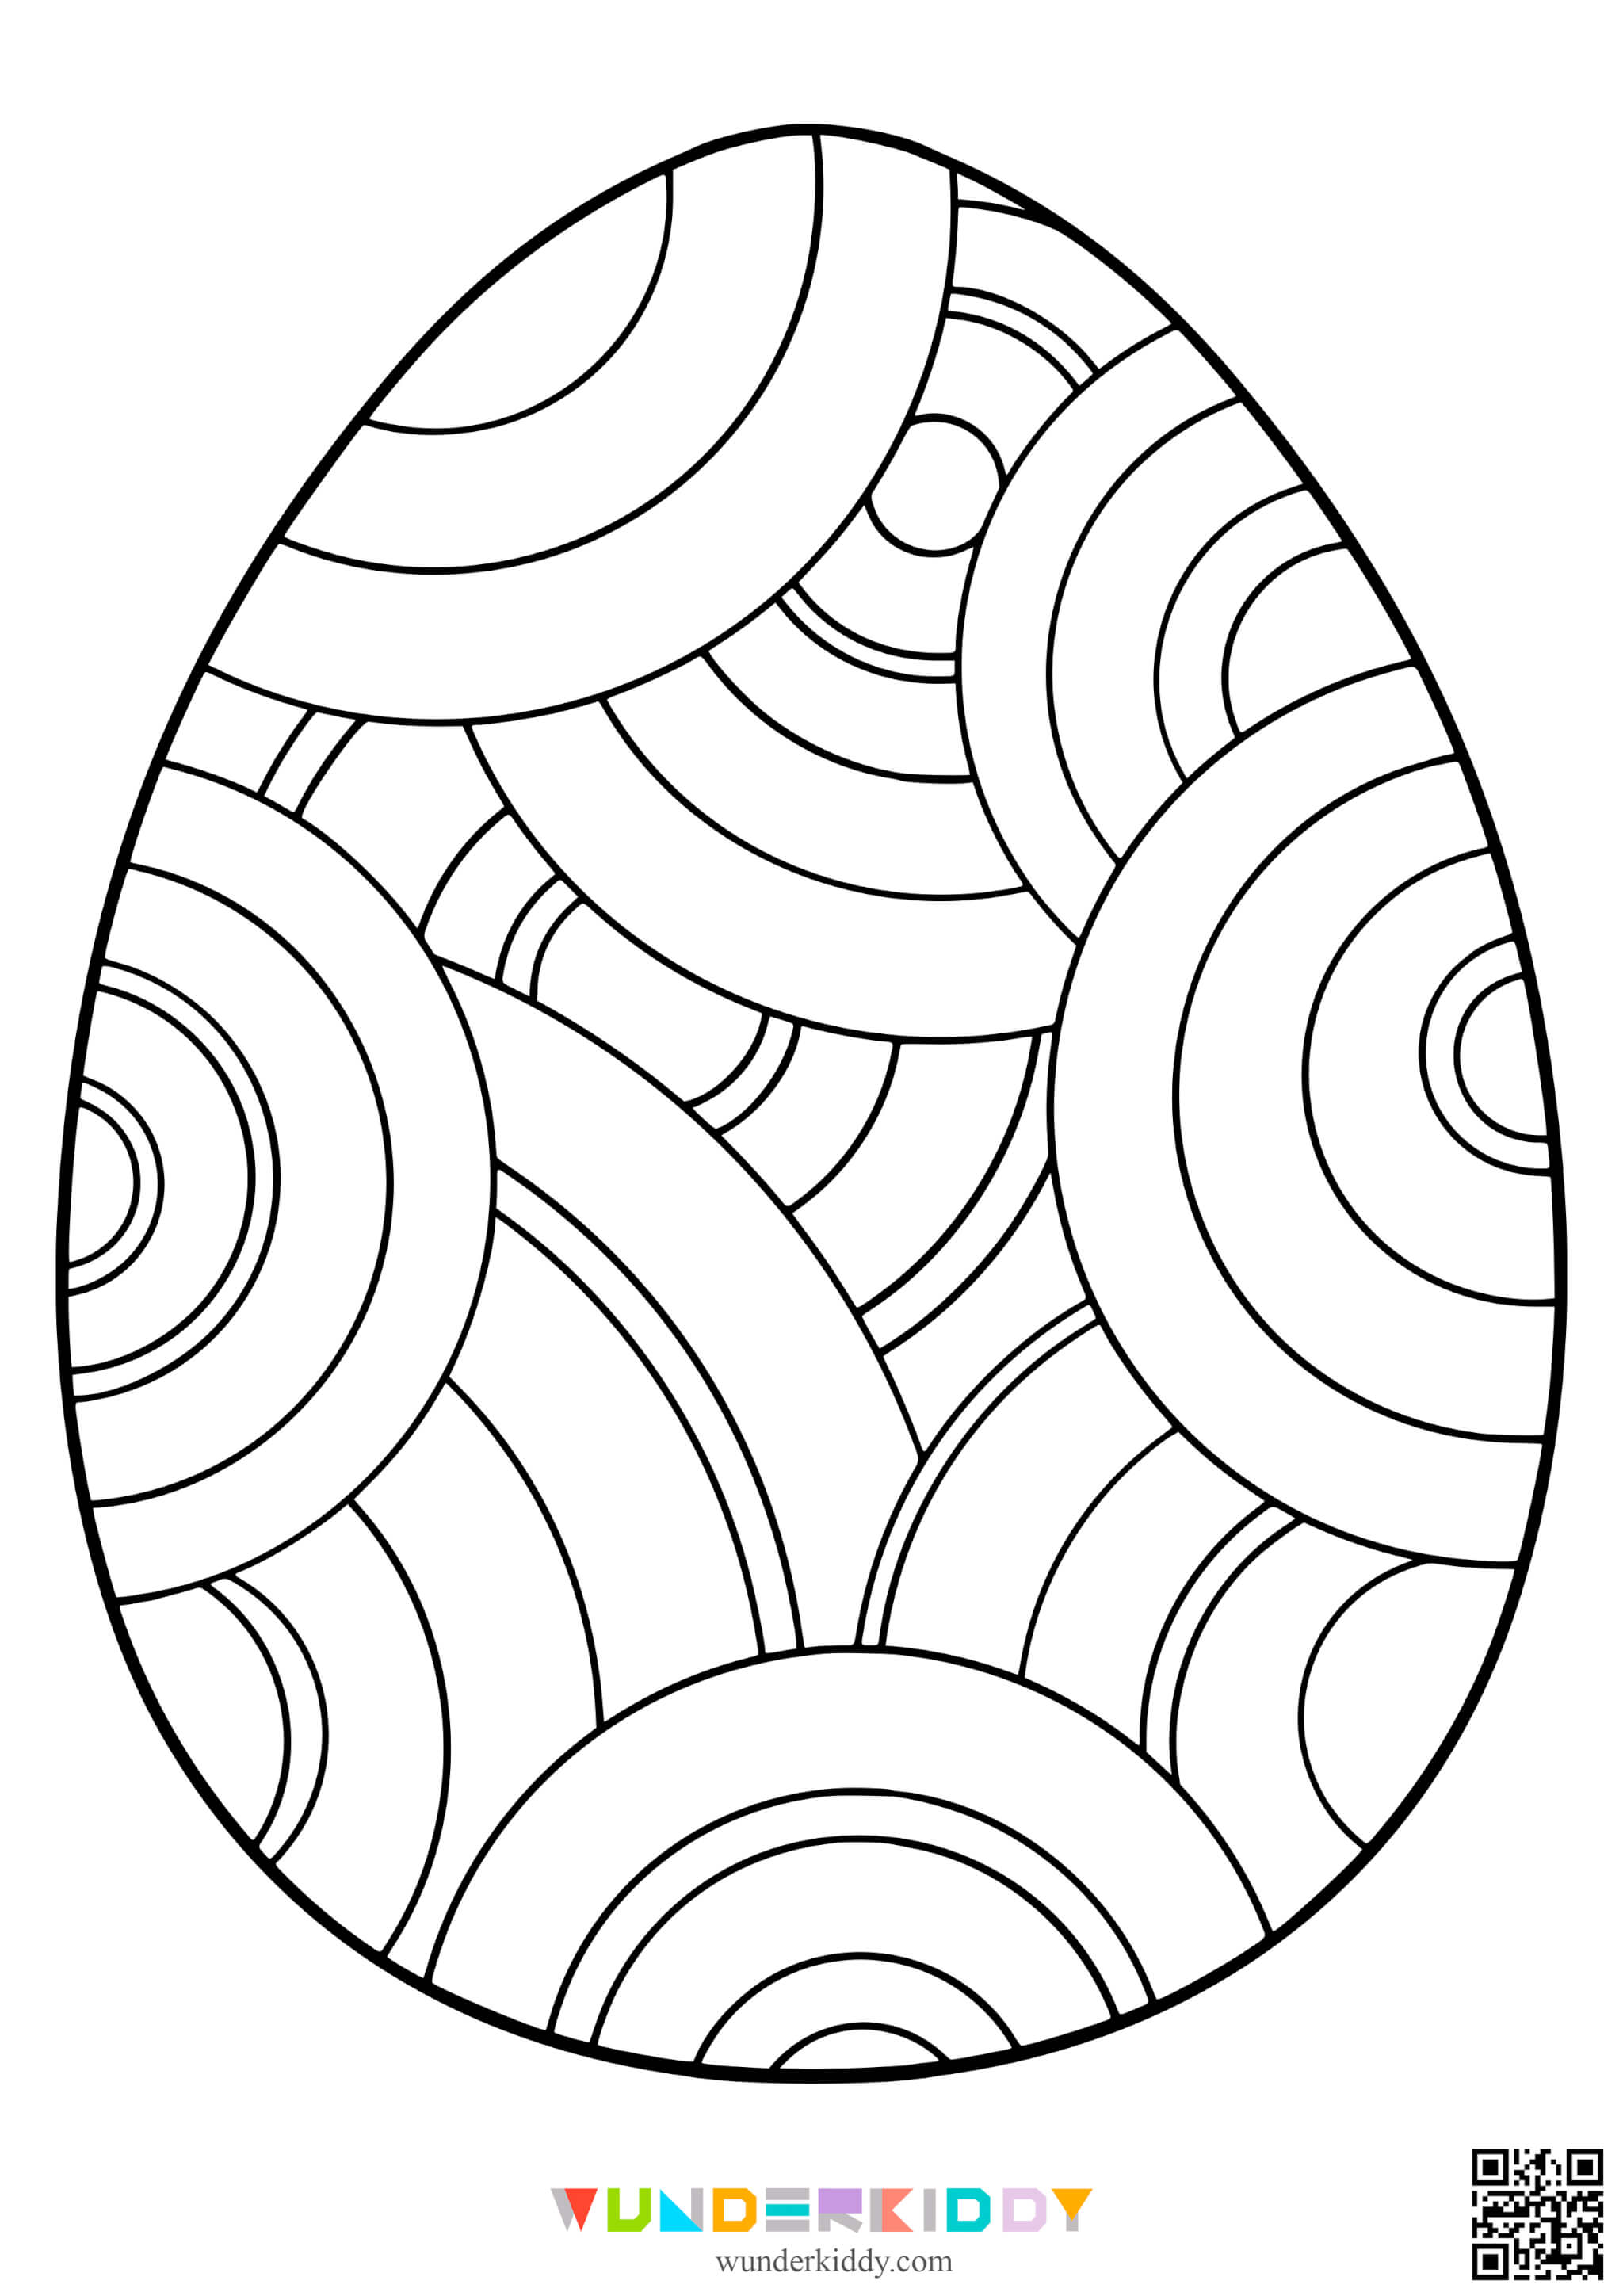 Easter Egg Template Colouring Page - Image 4